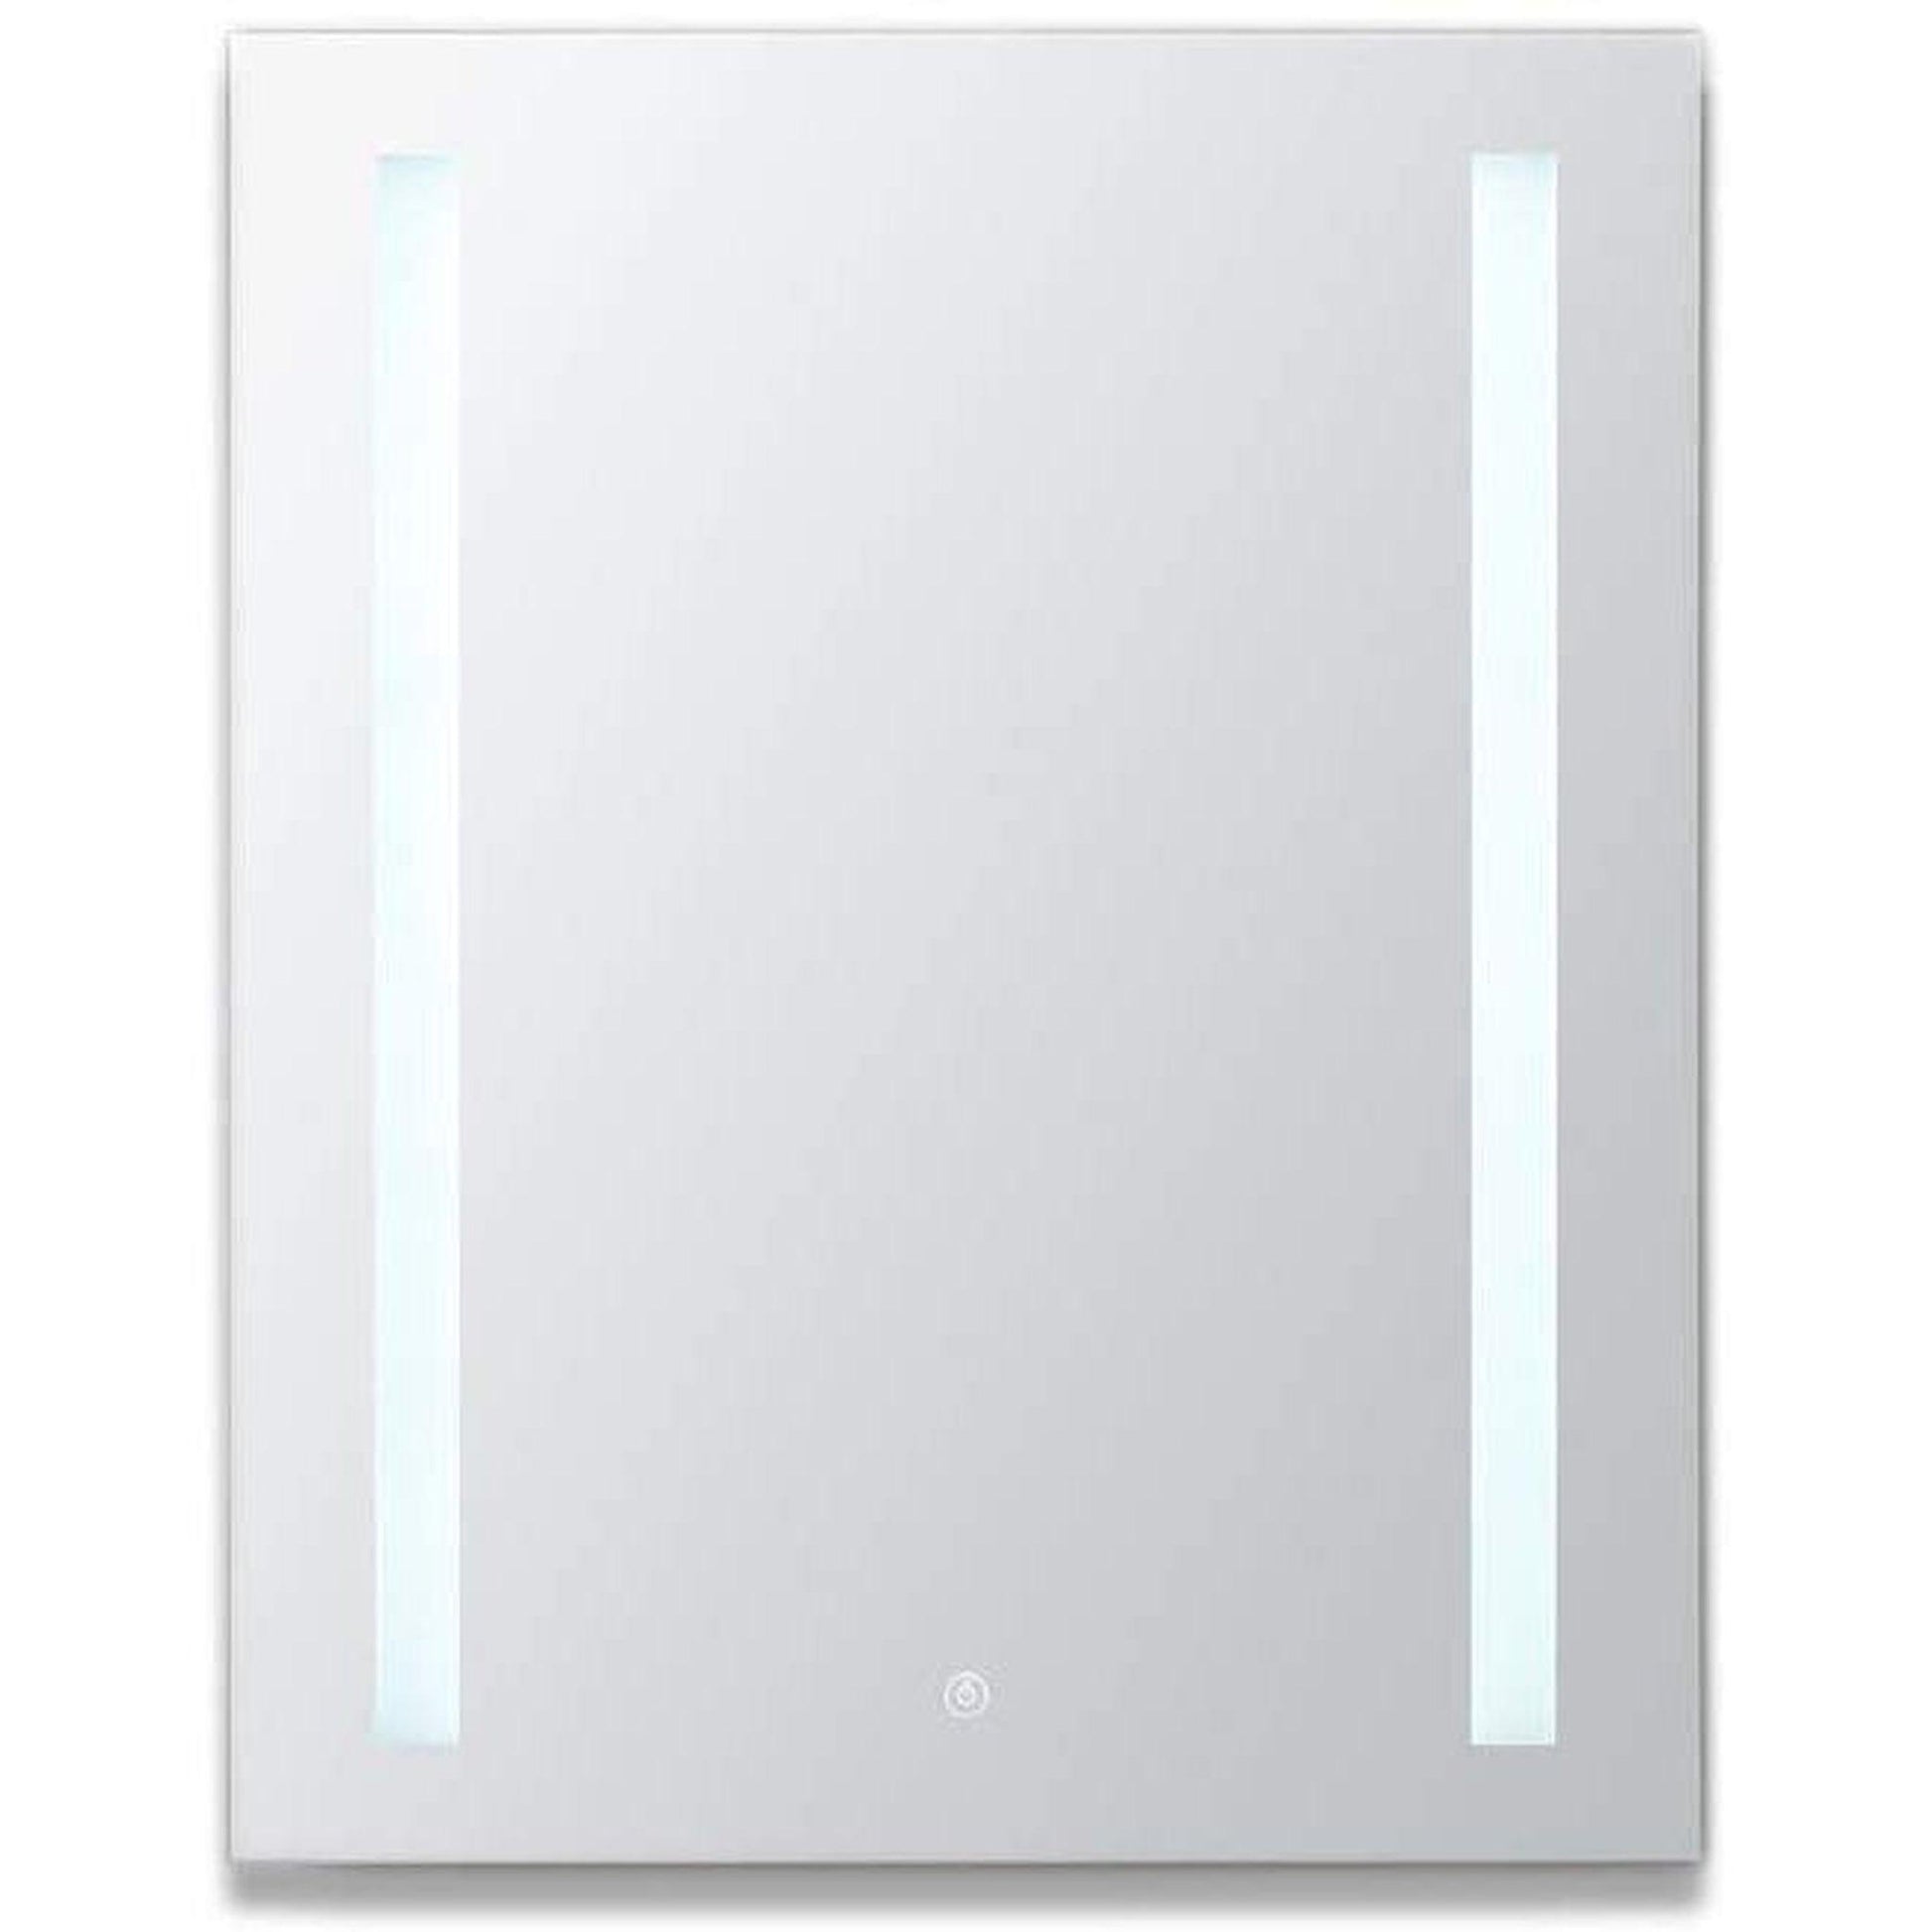 Aquadom Royale Basic 24" x 30" Single View Rectangular Left Hinged Recessed or Surface Mount Medicine Cabinet With LED Lighting, Touch Screen Button, Dimmer